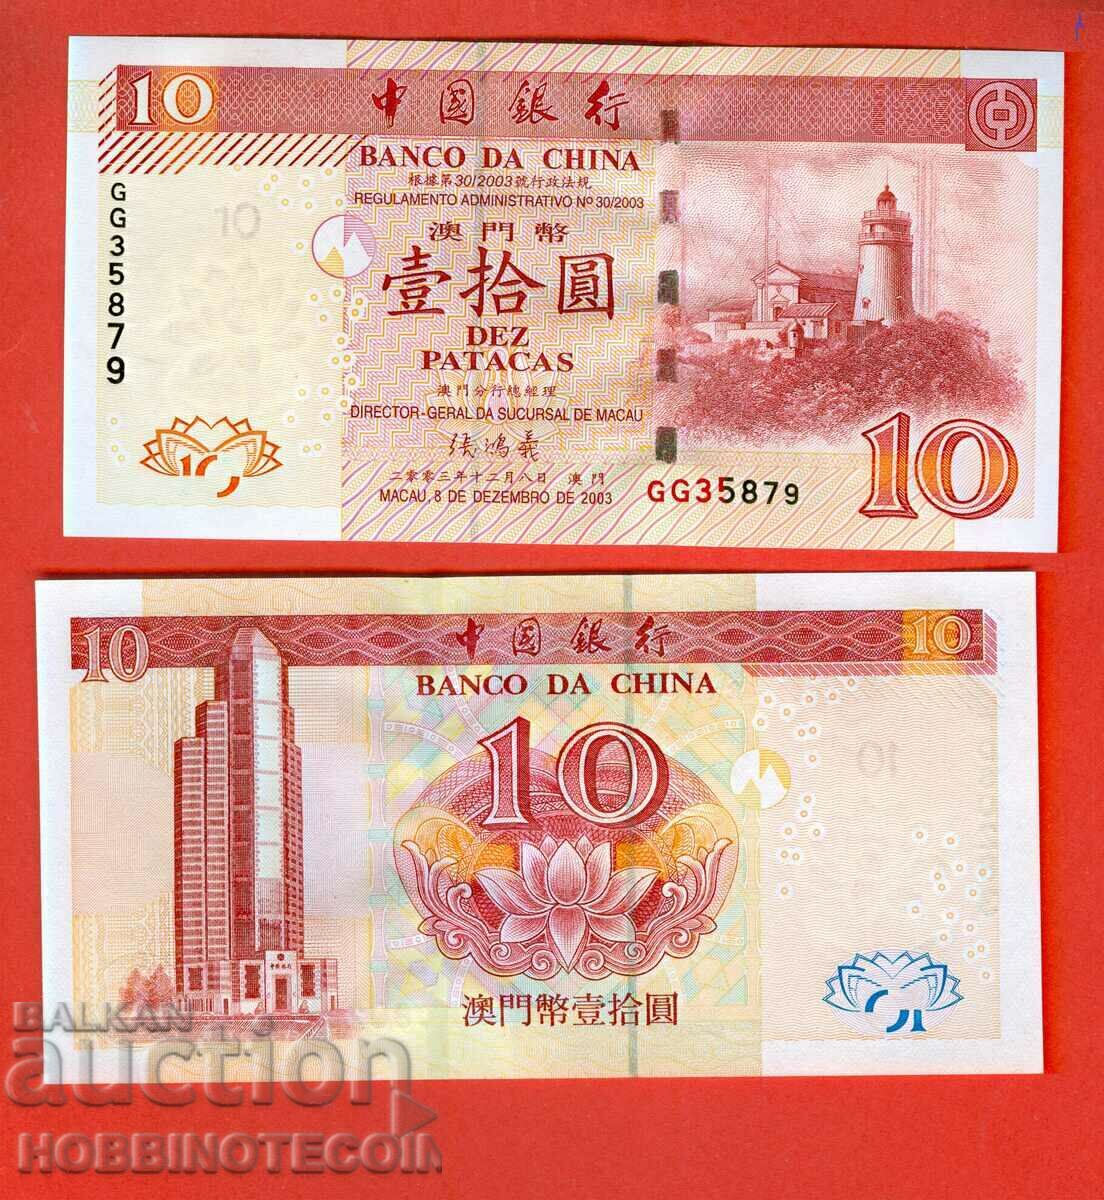 MACAO MACAO 10 Pataka issue issue 2003 NEW UNC